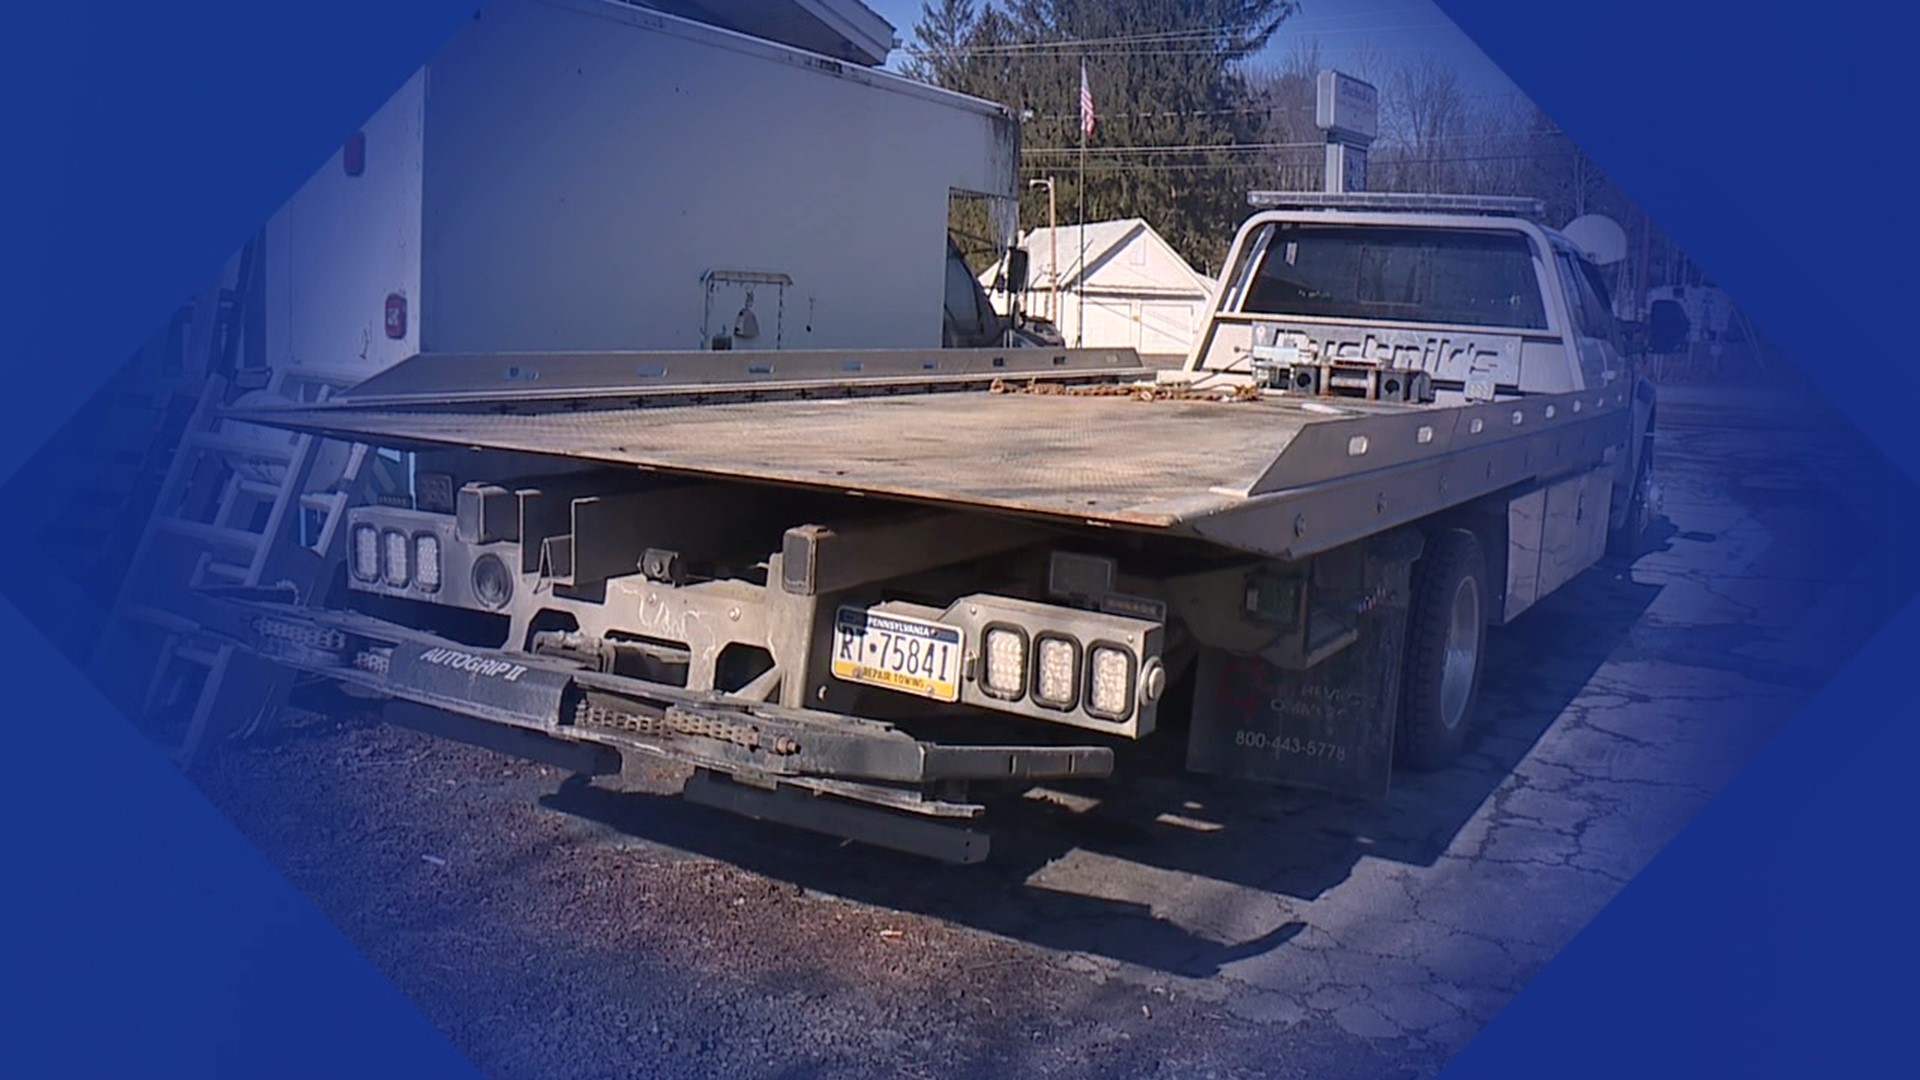 New legislation now gives tow truck operators a better chance to stay safe while they're on the side of the road.